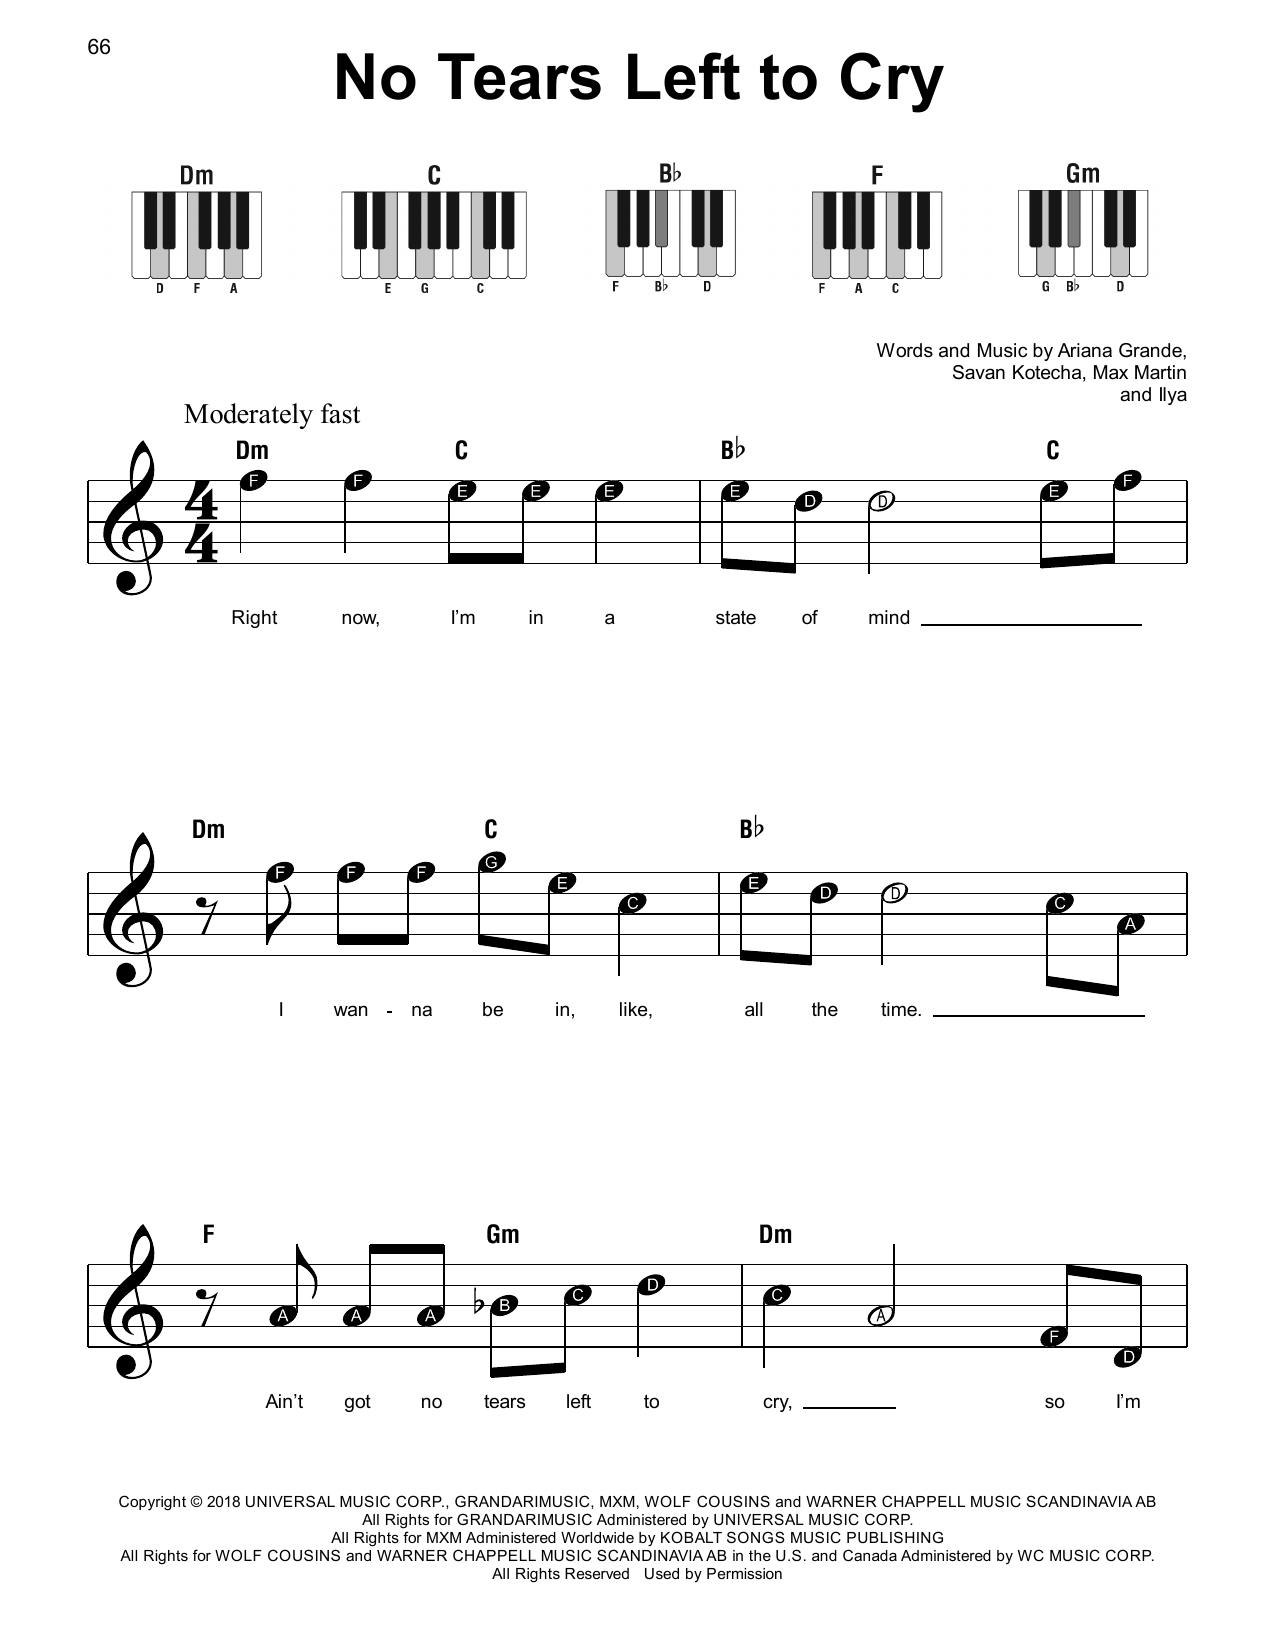 Ariana Grande No Tears Left To Cry sheet music notes and chords. Download Printable PDF.